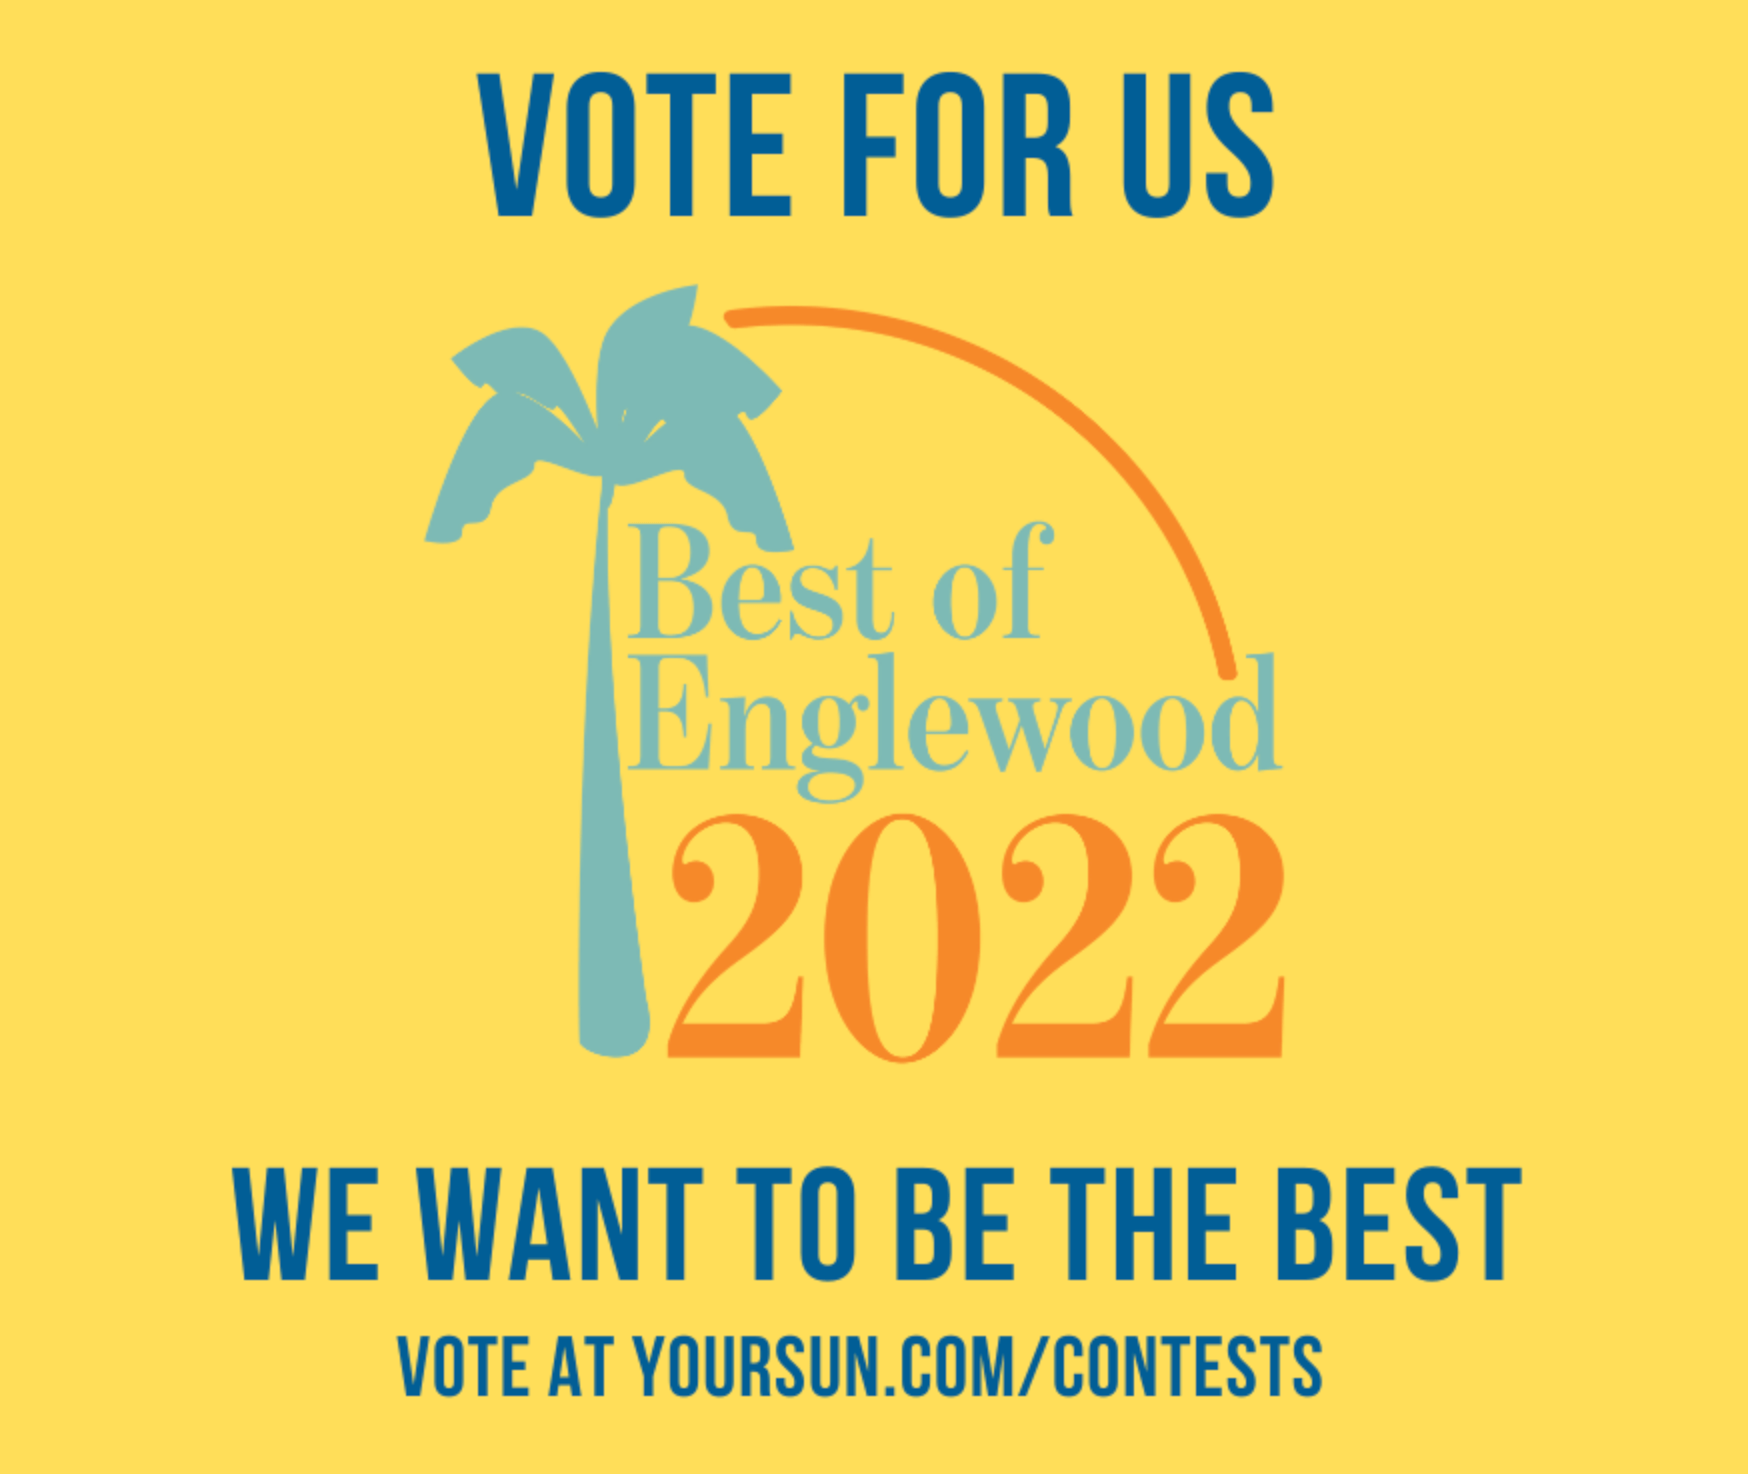 Vot for us Best of Englewood